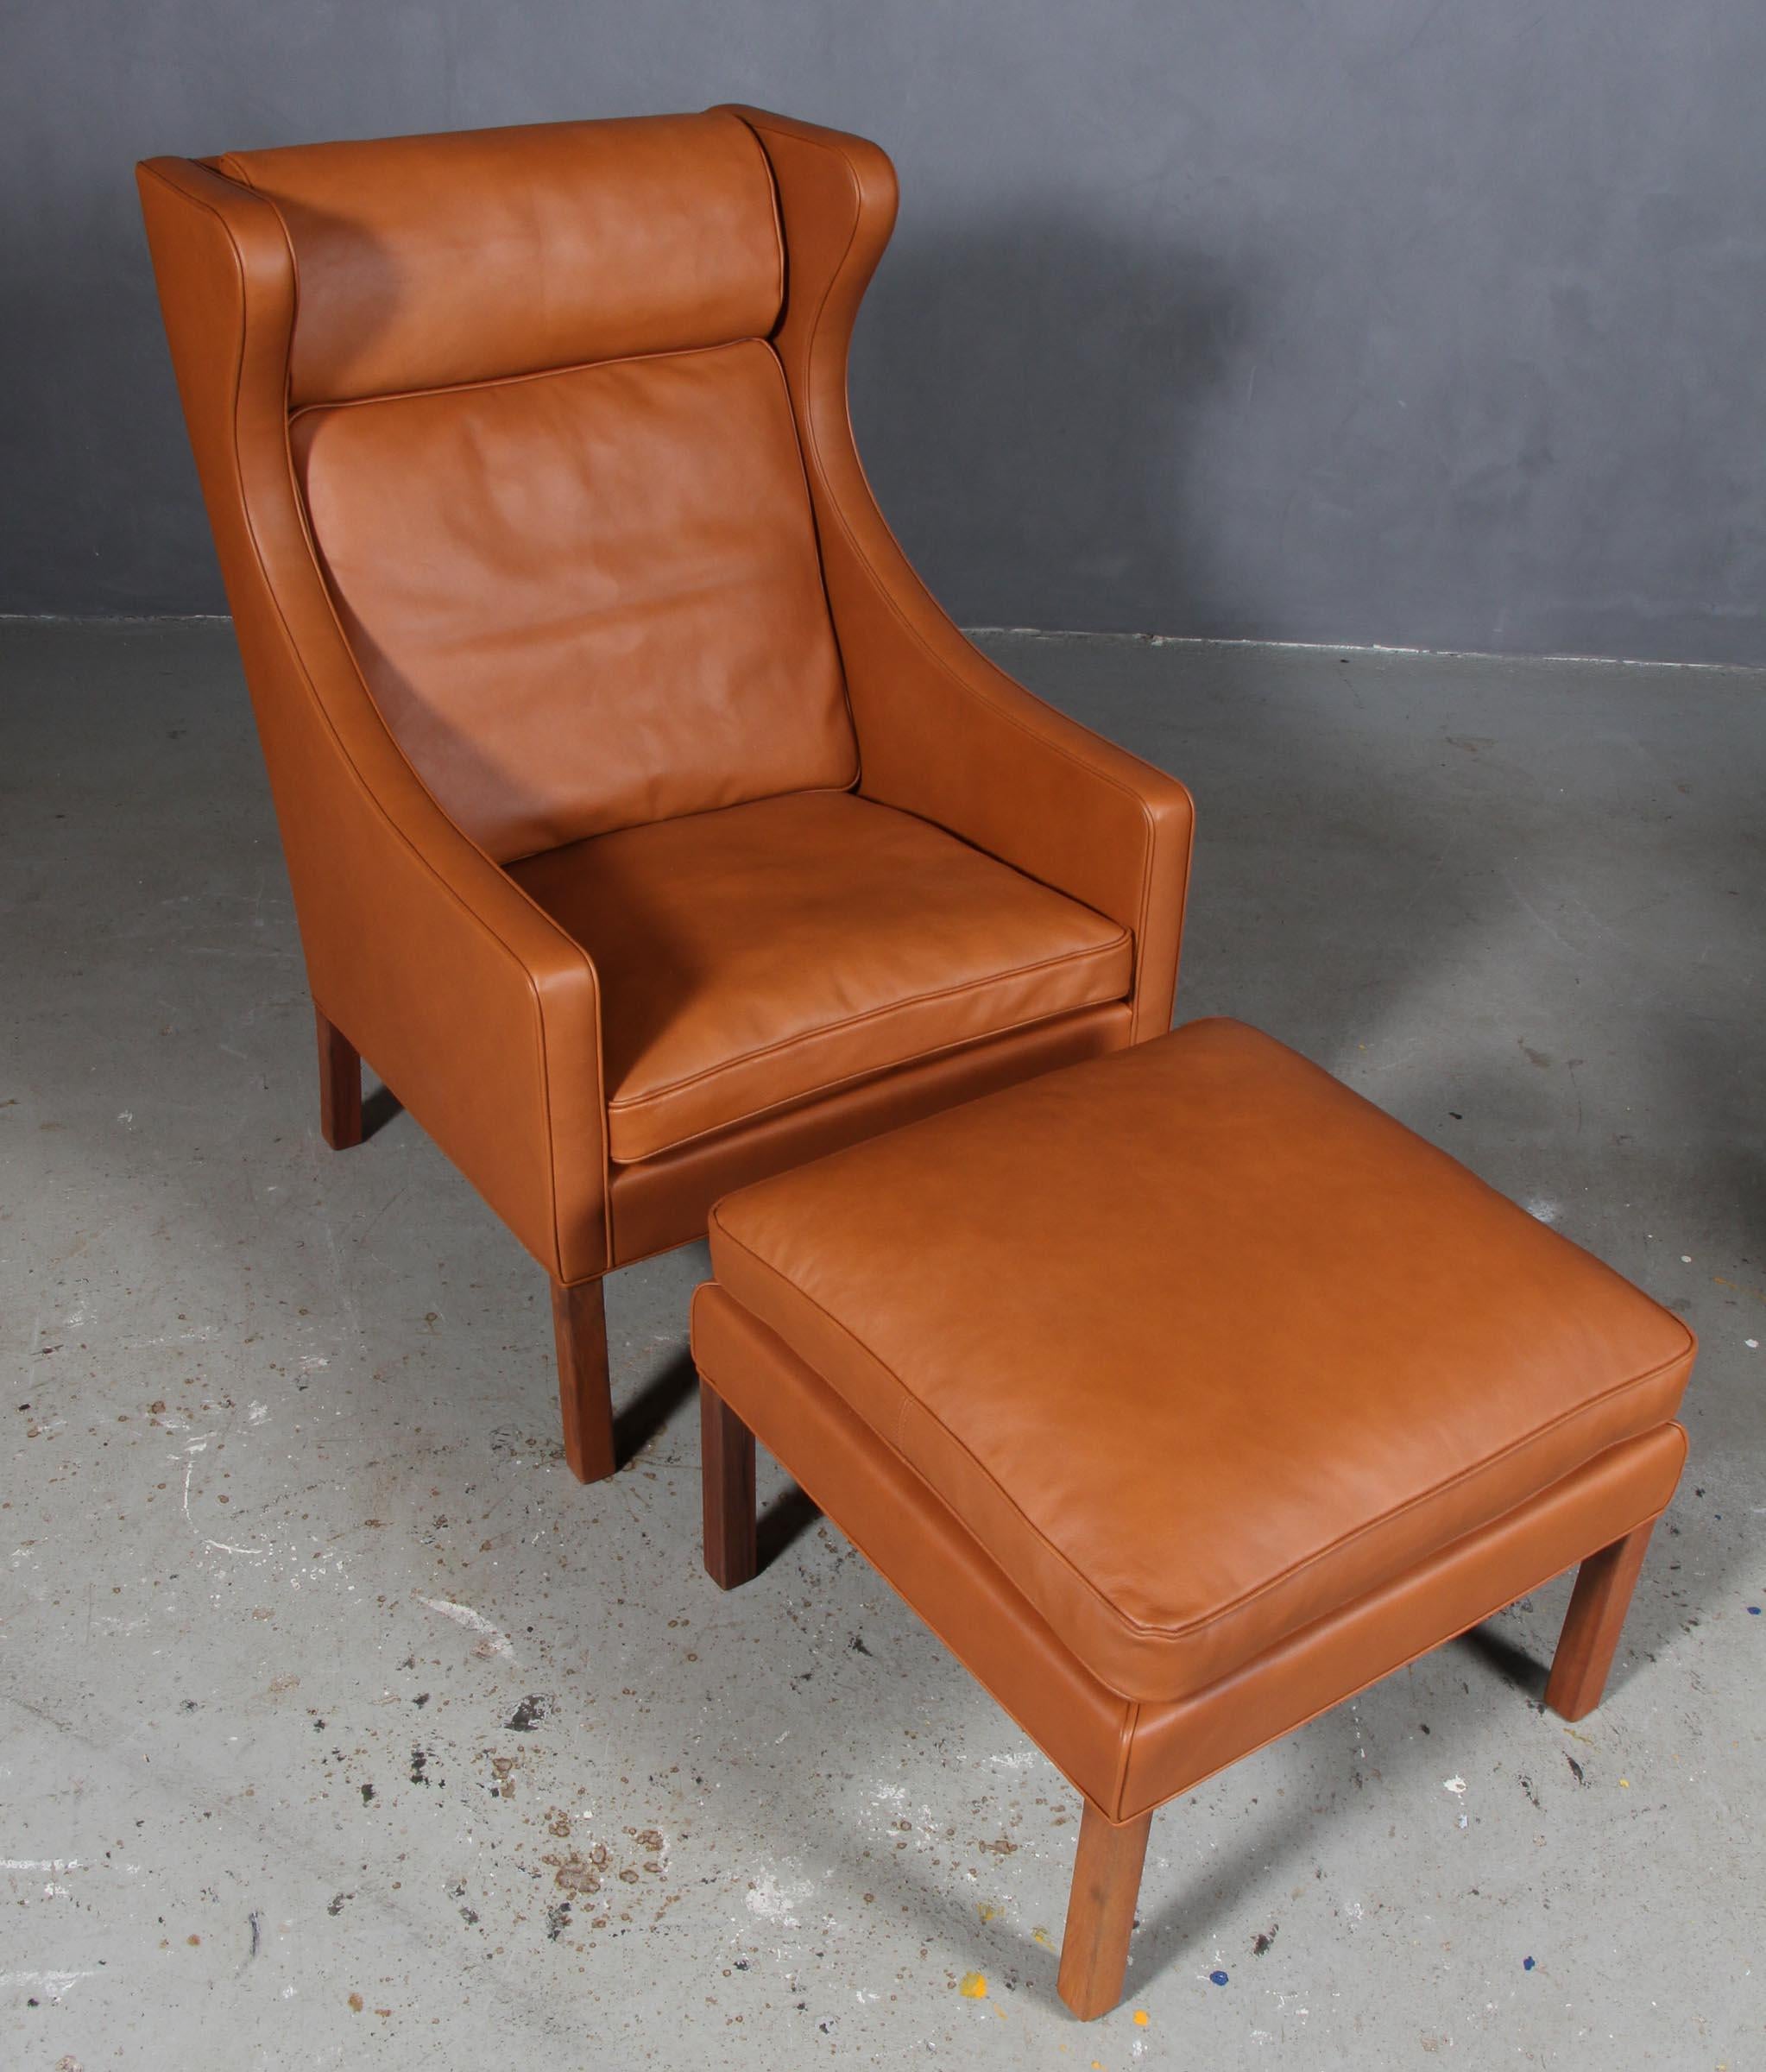 Børge Mogensen wingback chair with ottoman new upholstered with walnut elegance leather.

Legs in teak.

Model 2204, made by Fredericia Furniture.